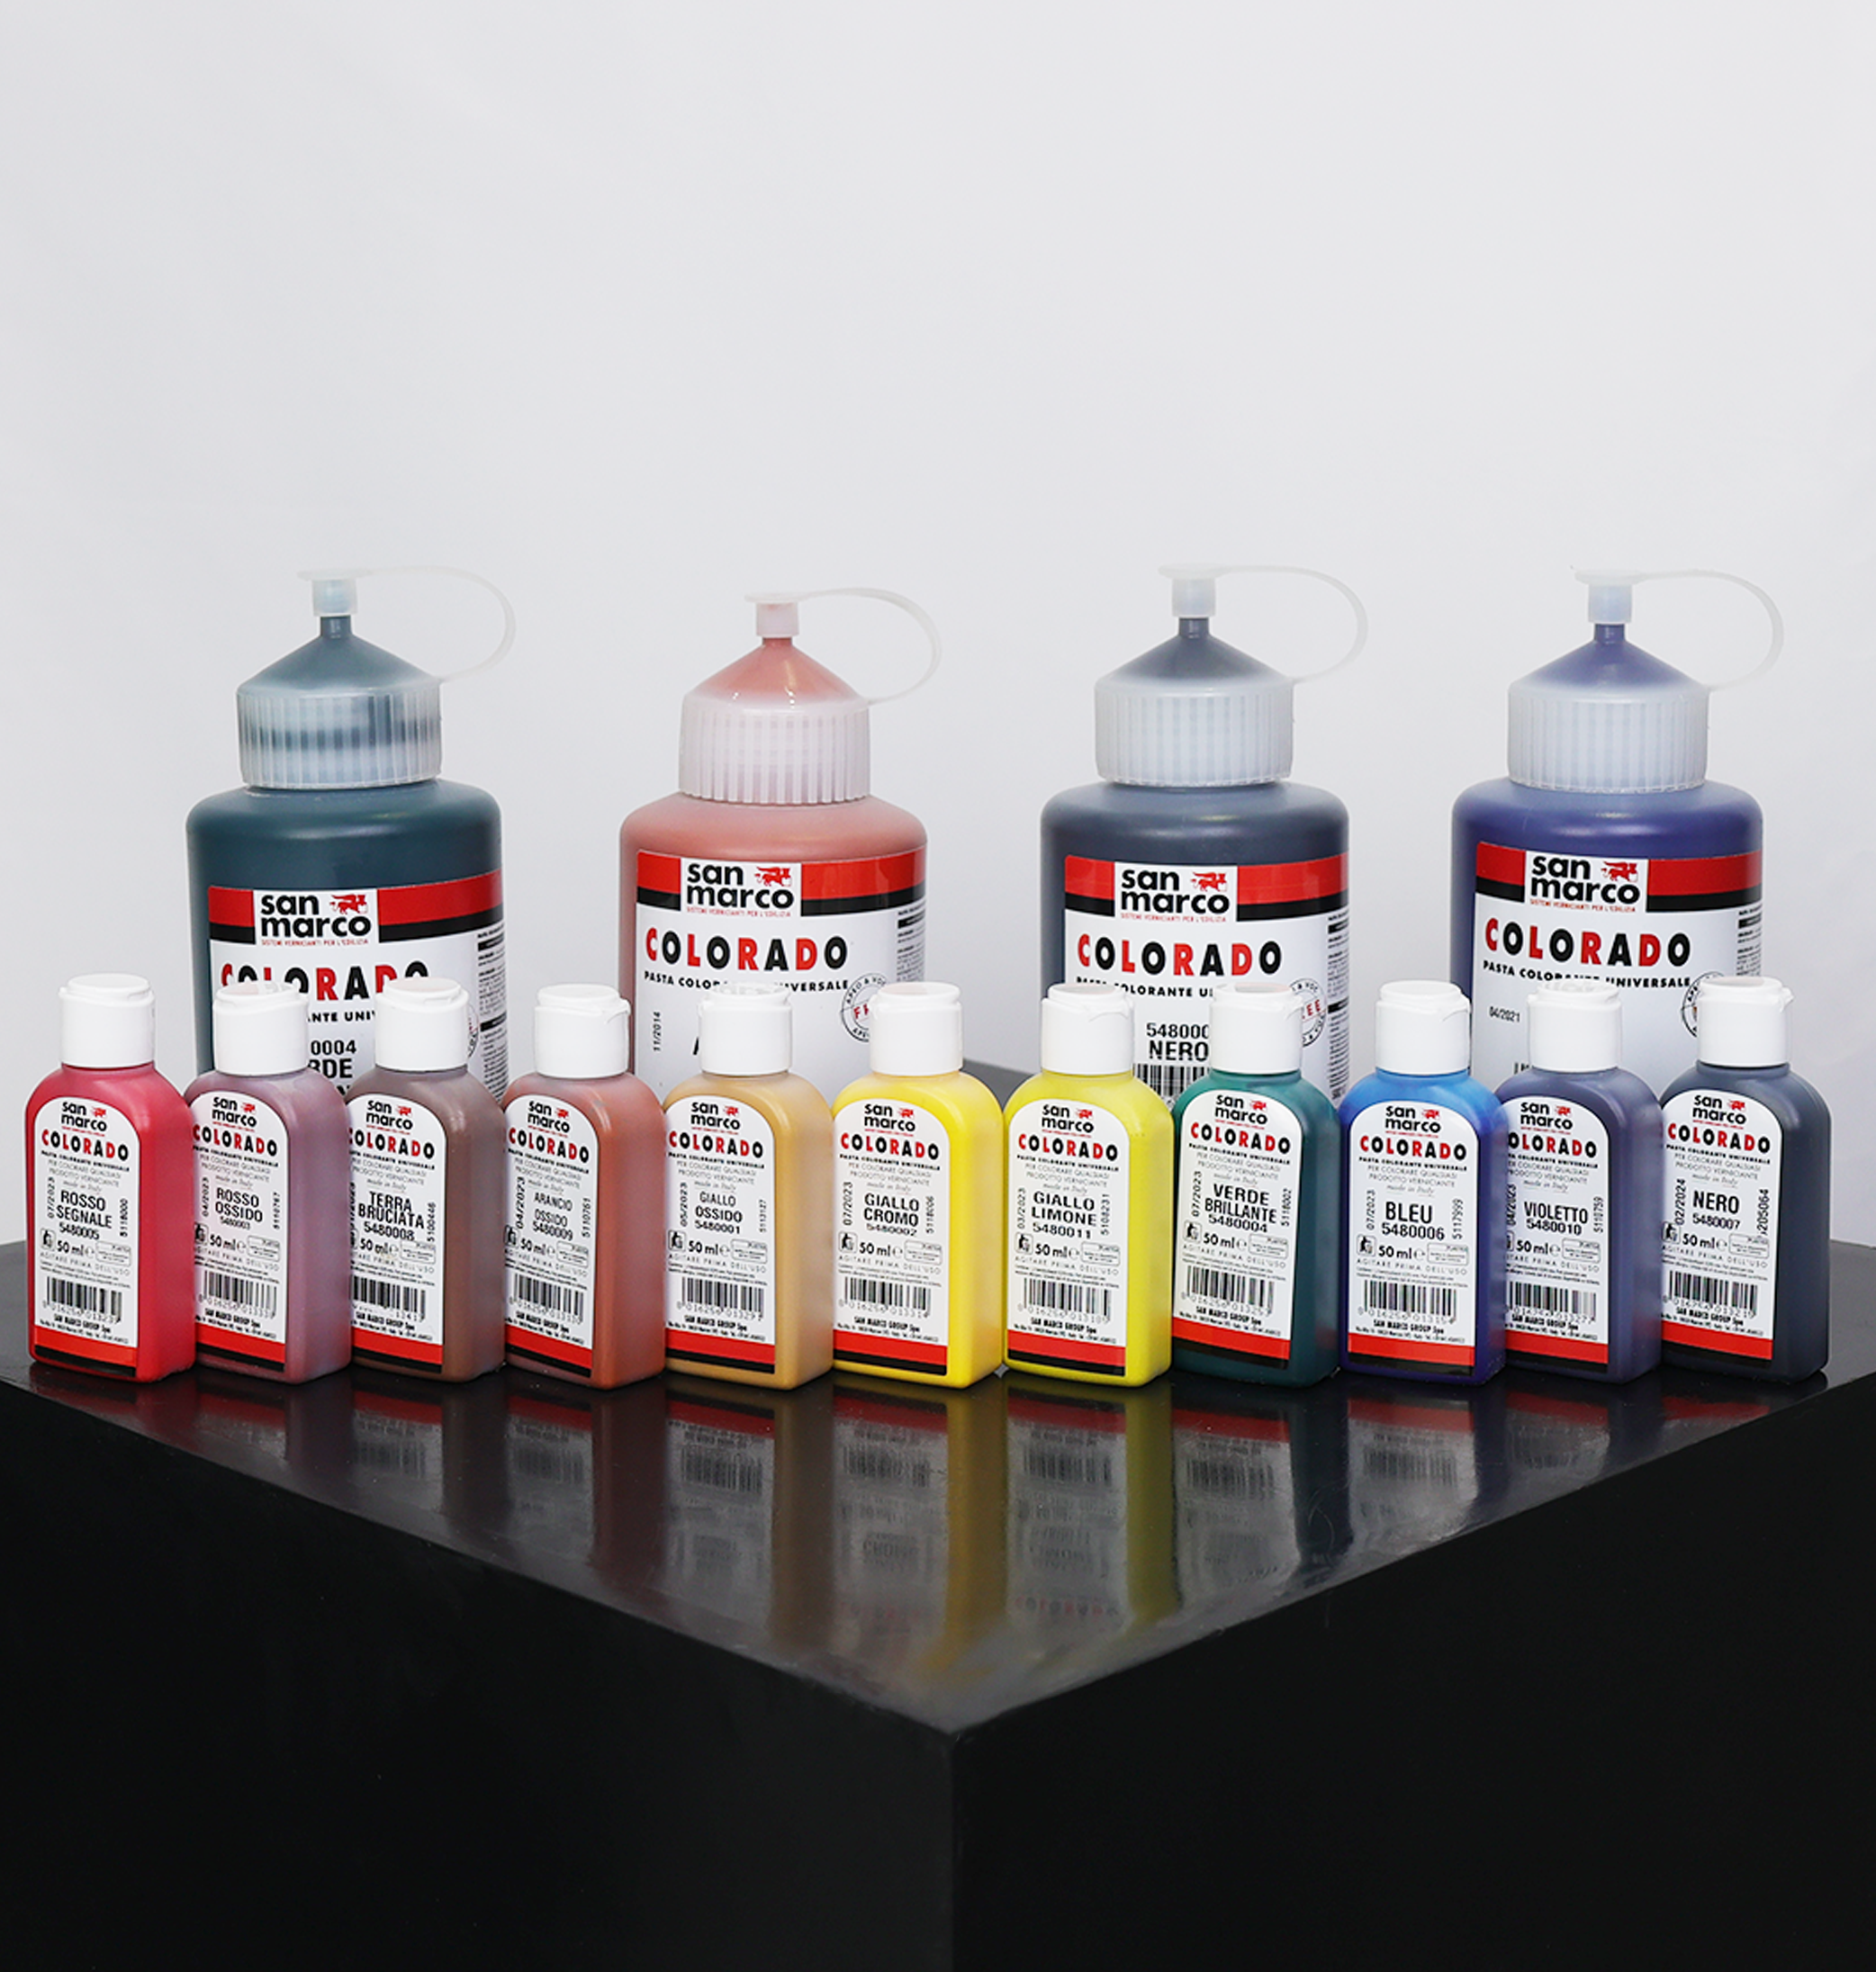 Colorado - High Concentration Pigments for Paints, Plasters & Other Decorative Products